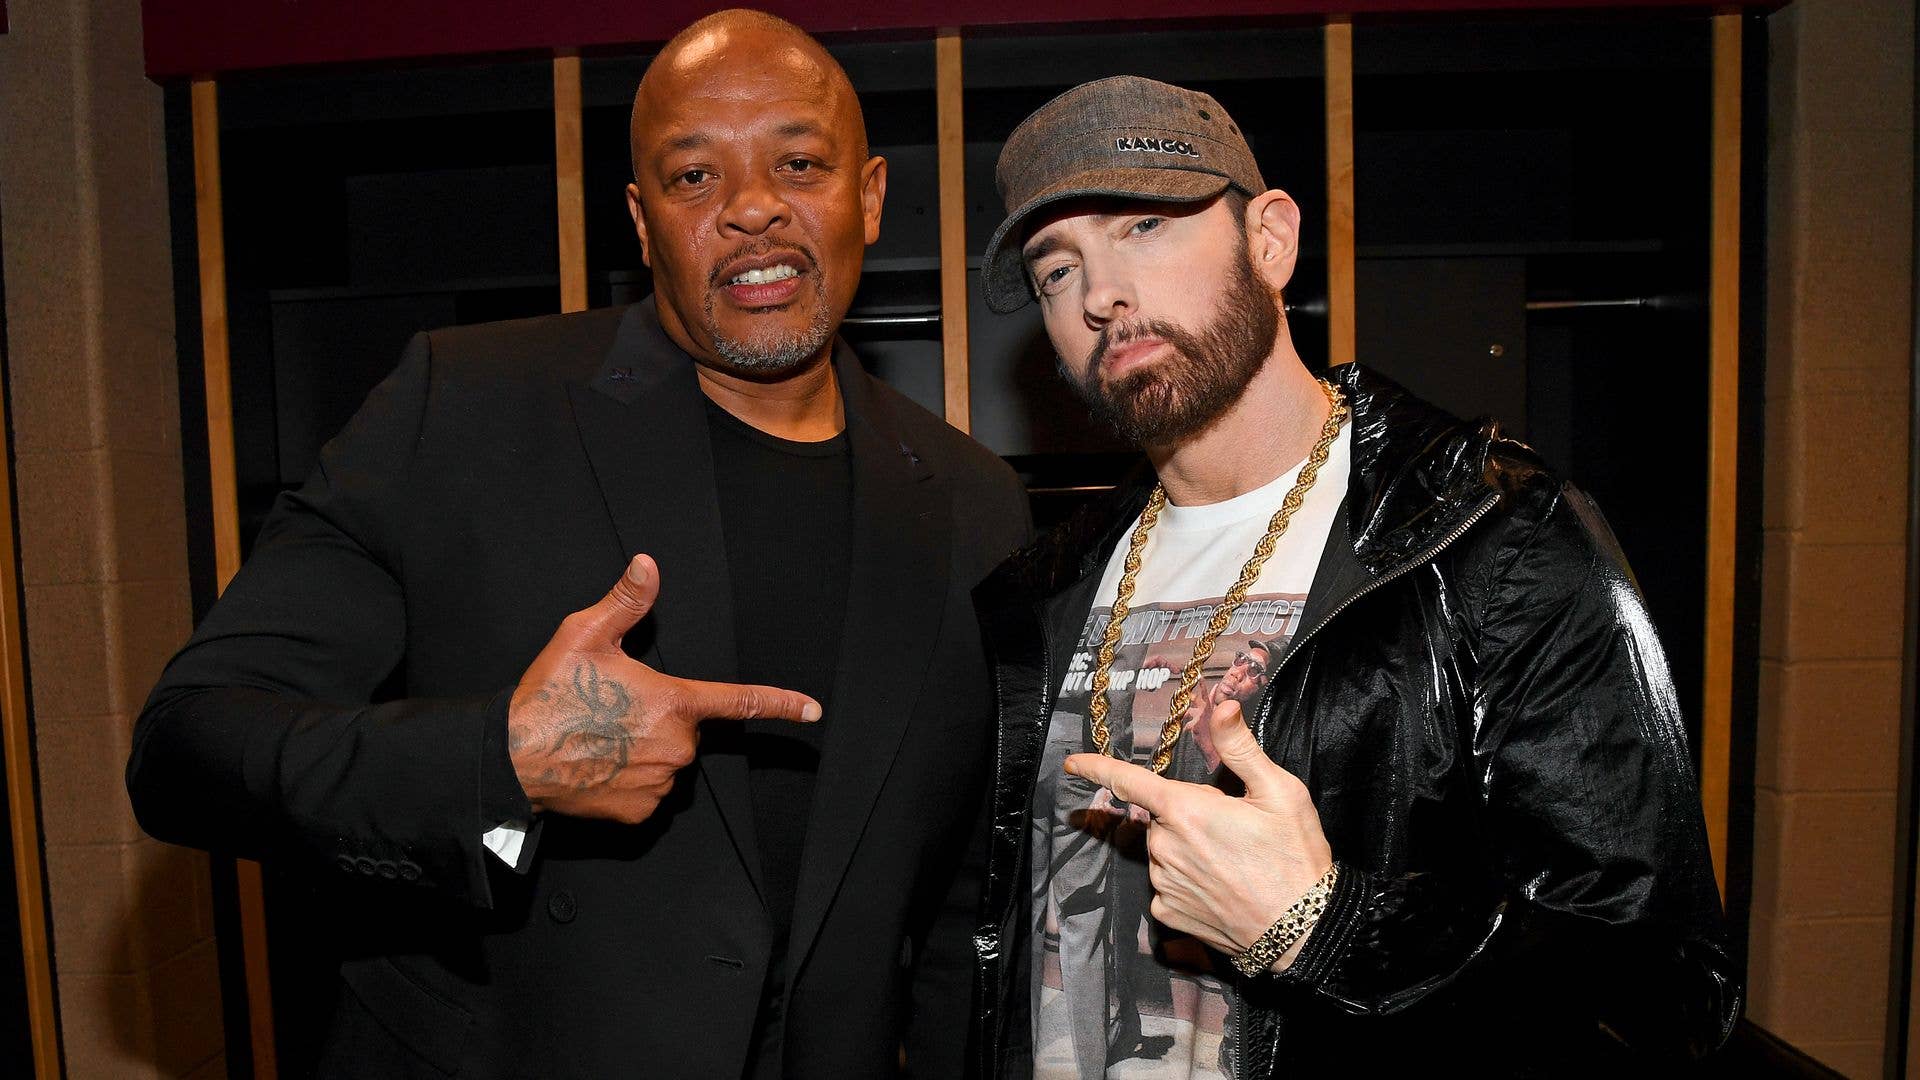 Dr. Dre pictured with Eminem